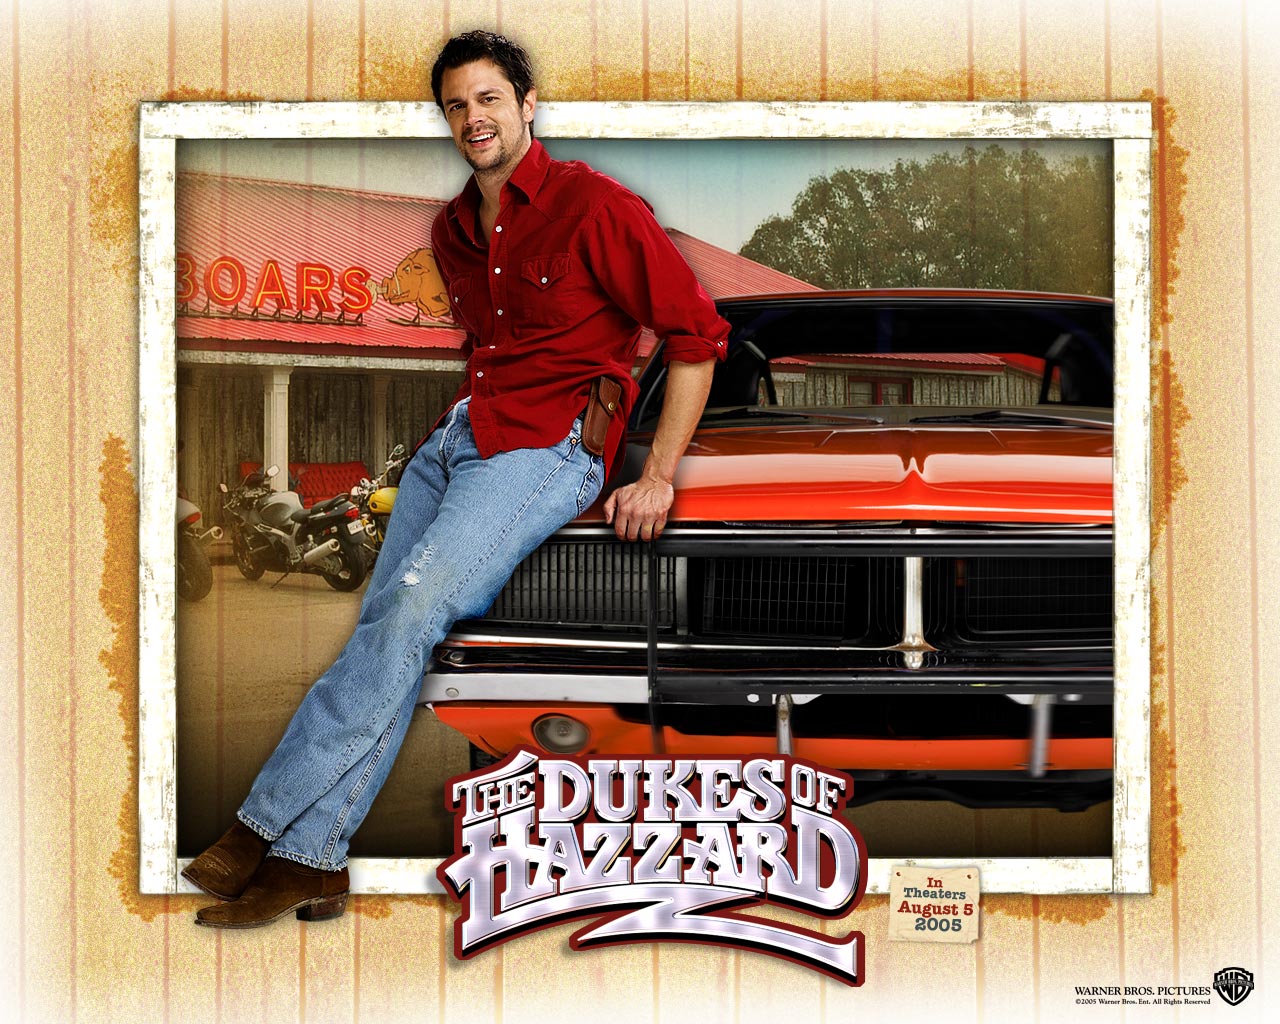 Download High quality The Dukes Of Hazard wallpaper / Movies / 1280x1024